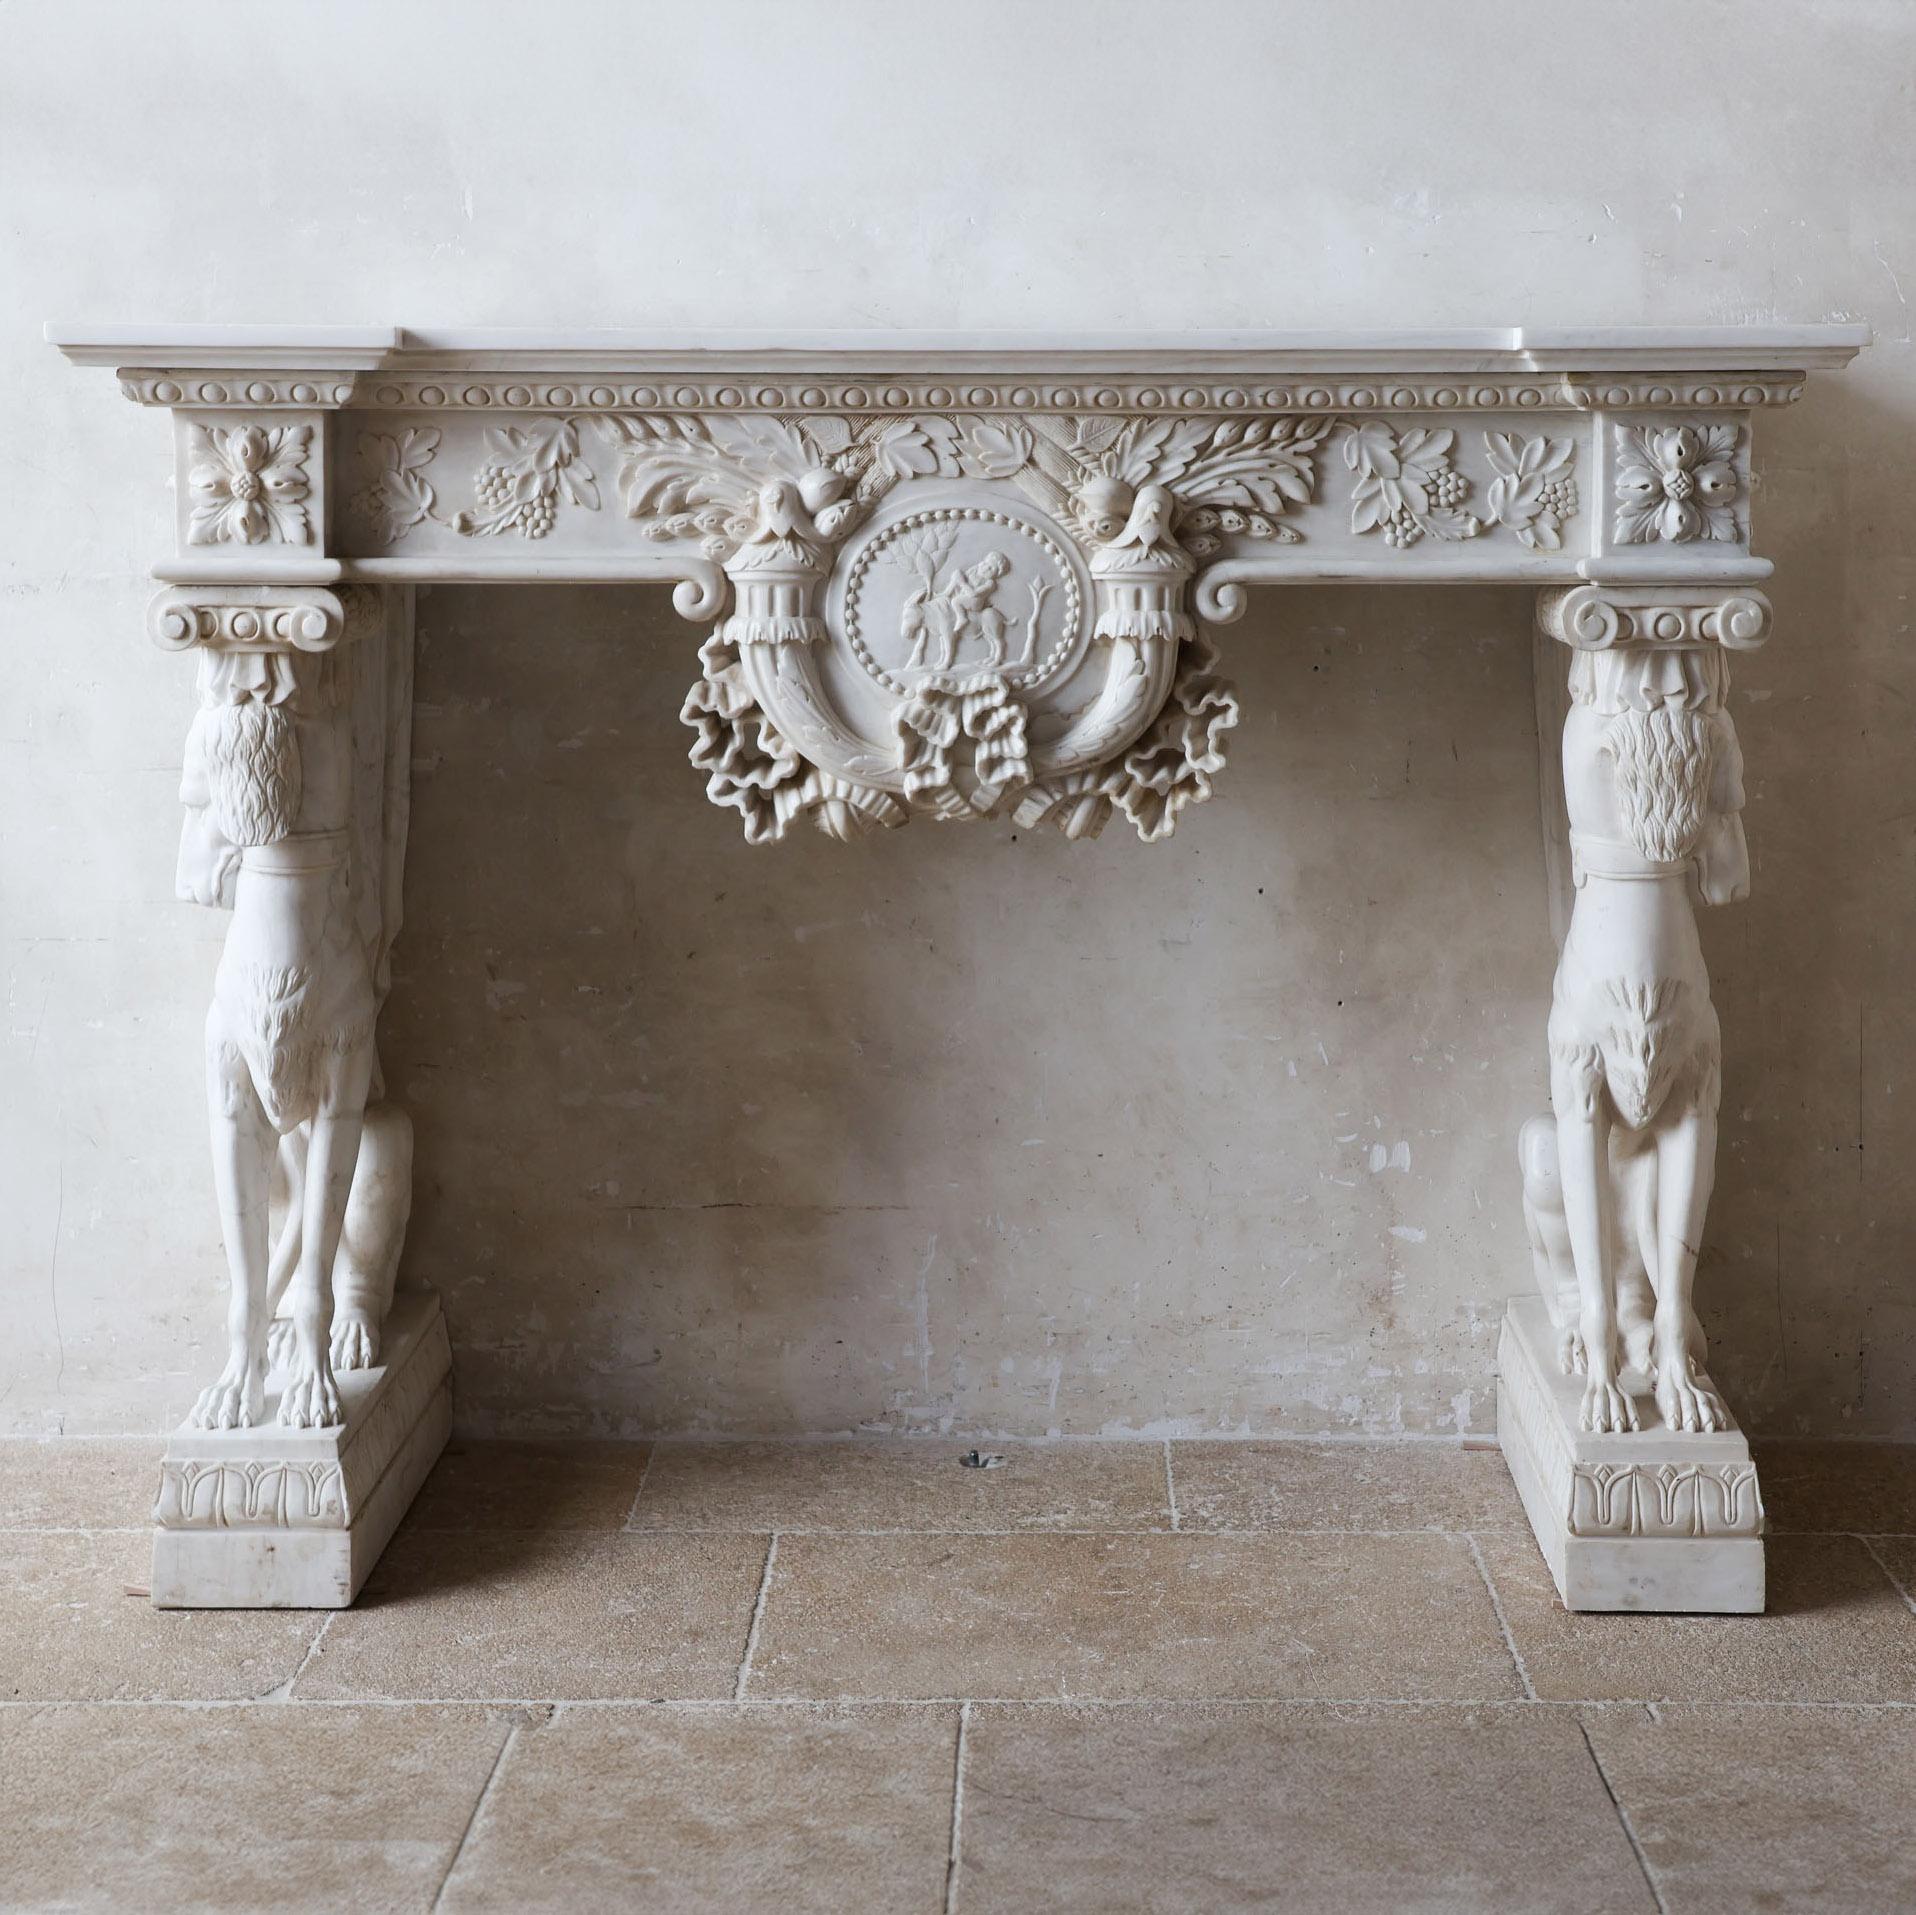 A rich and ornate monumental mantelpiece in the Italian Renaissance Revival style. Executed in the most exclusive selection of white marble from Carrara, the statuario quality, characterized by its pristine appearance without veins. The entire